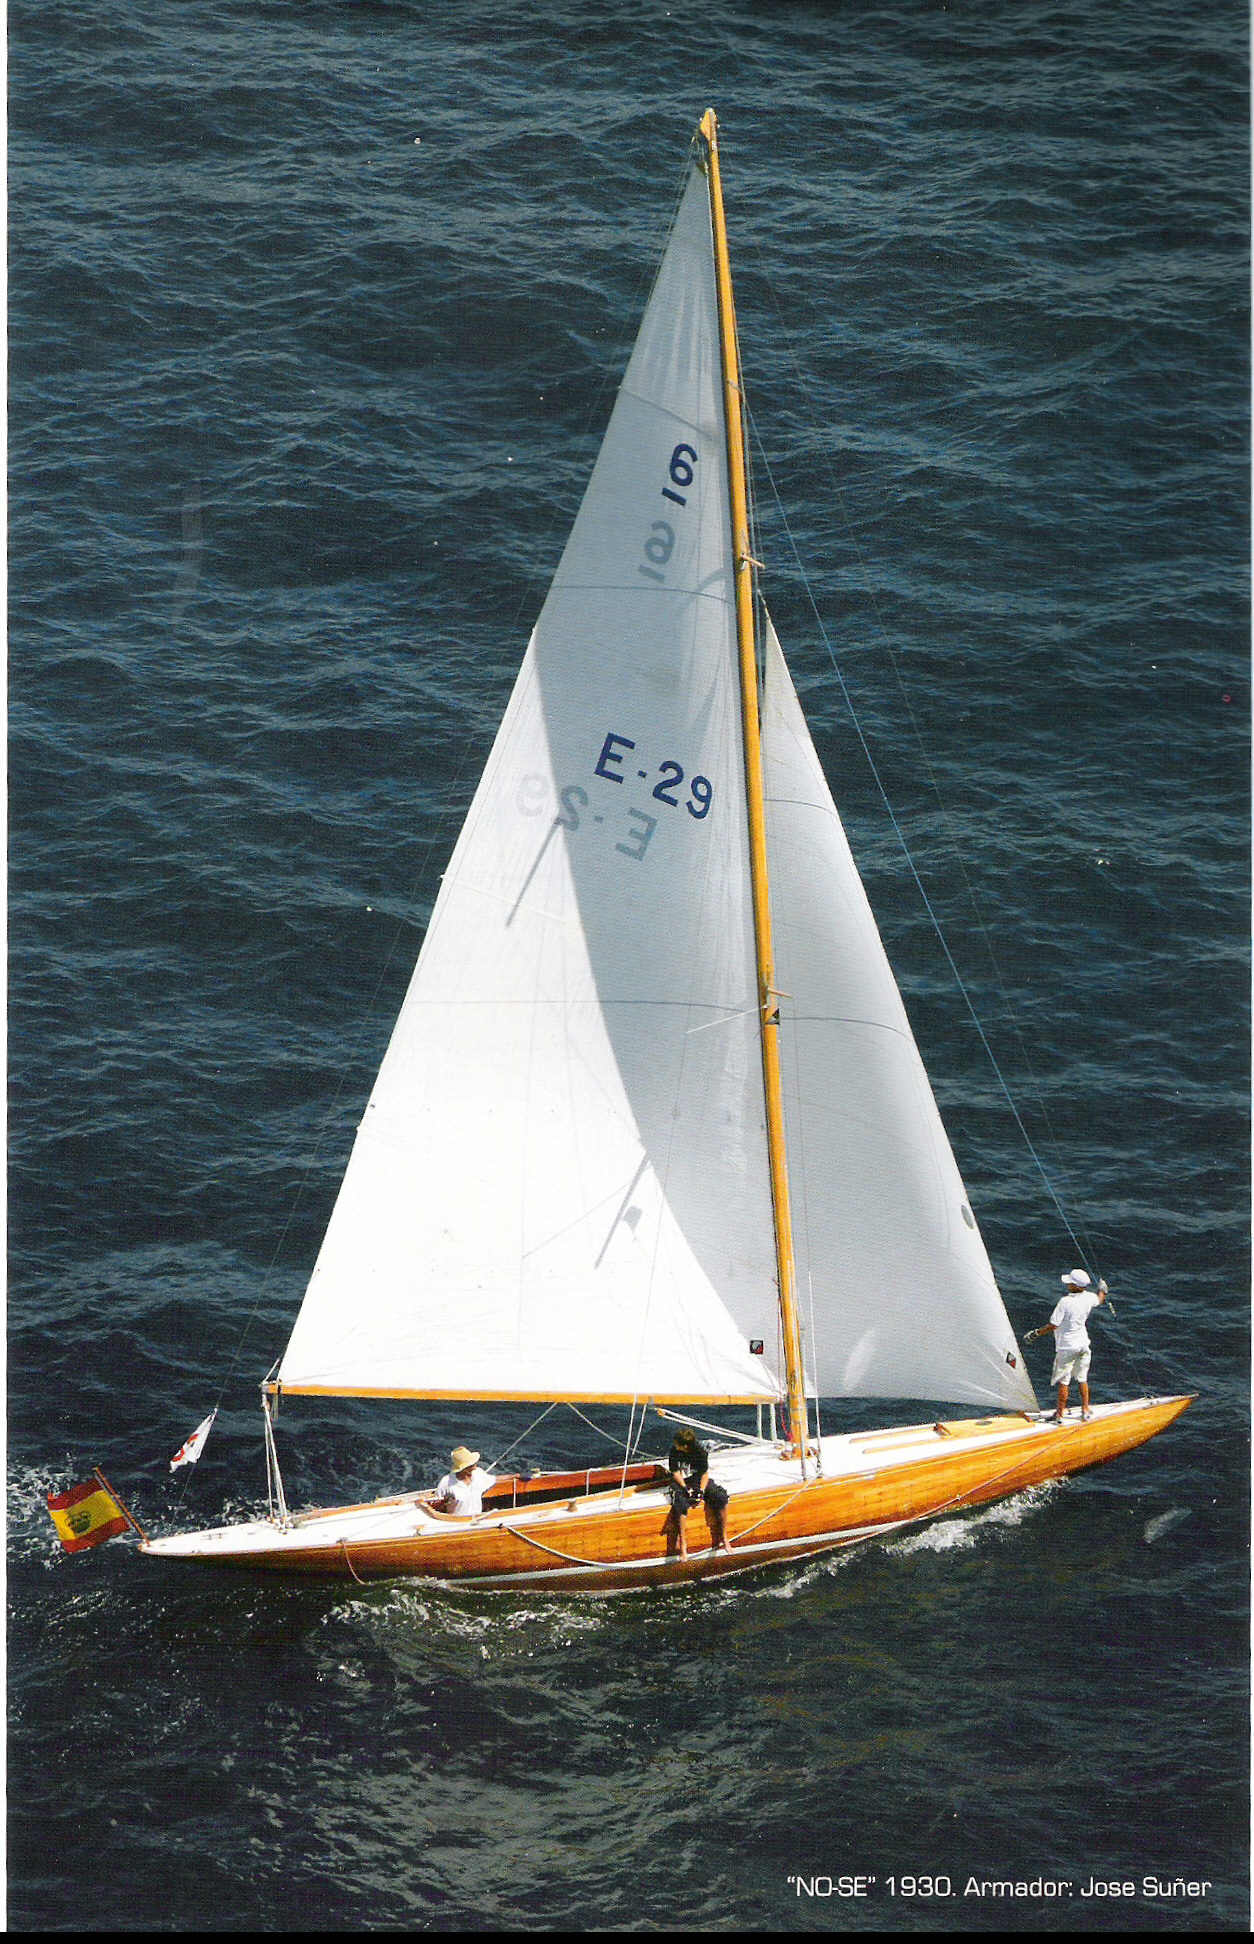 Polished wooden hull with a white sail.